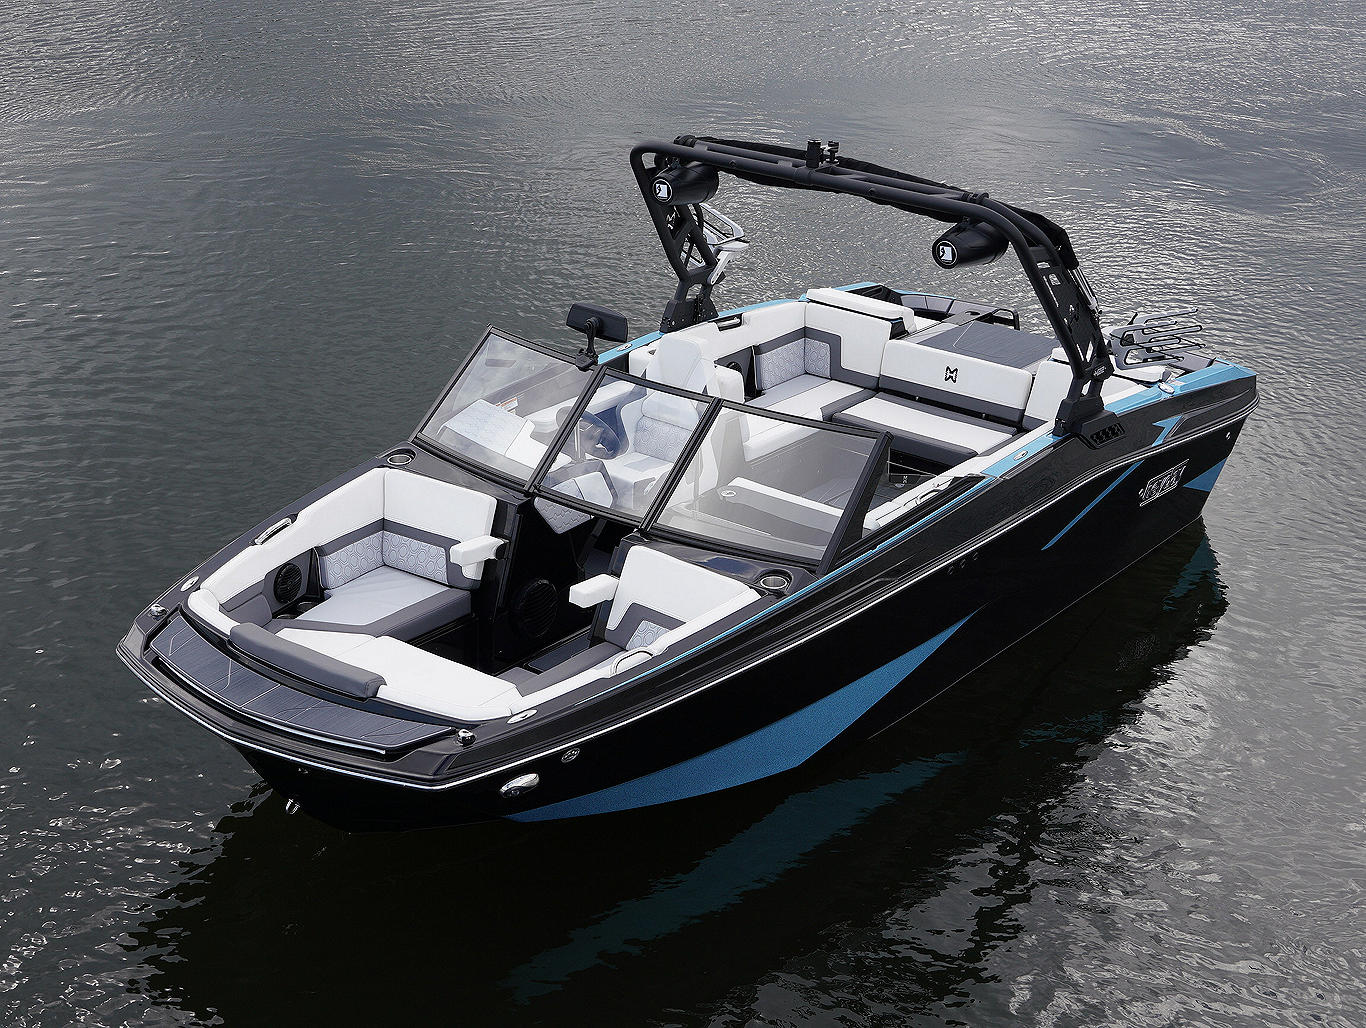 HEAVY SWELL  (Heyday Wakeboard Boat 370HP-$199 Half Day/ $399 Full Day)